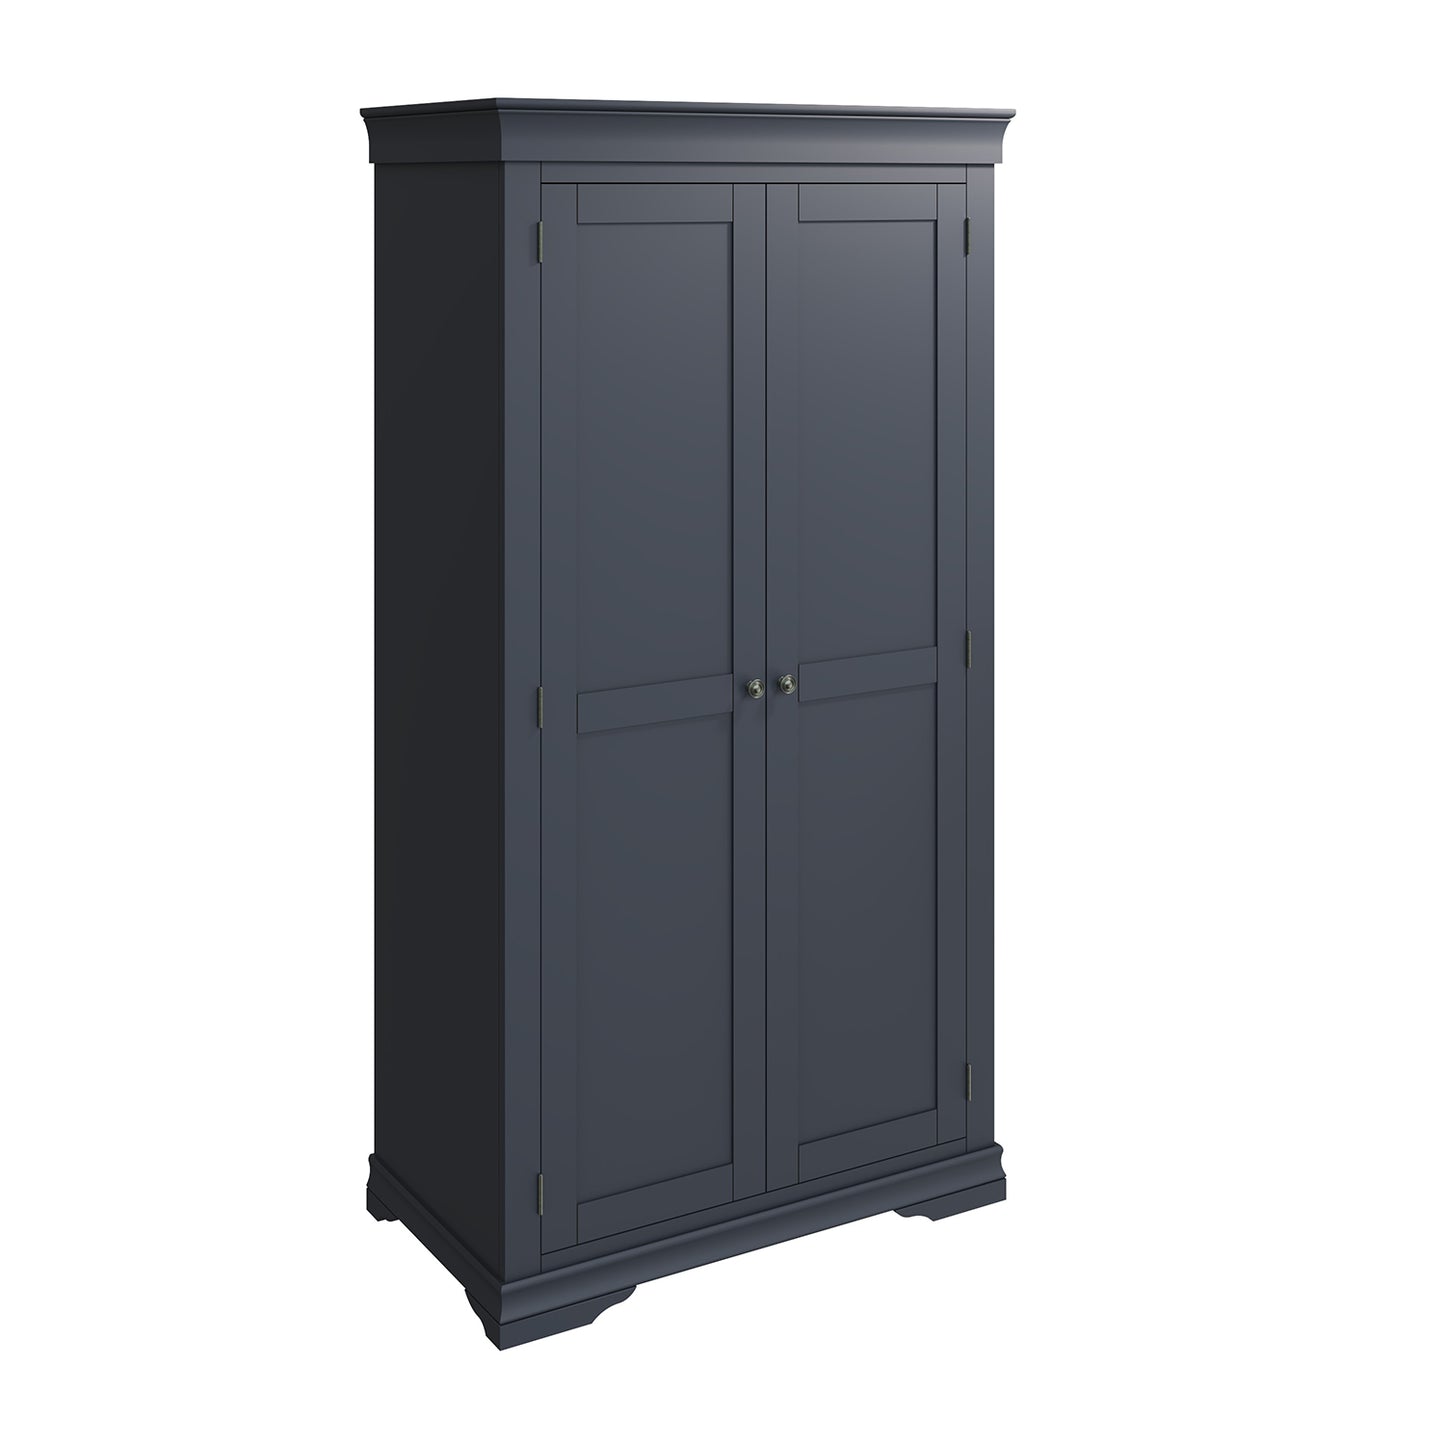 Toulouse Midnight Grey Wardrobe - Full Hanging